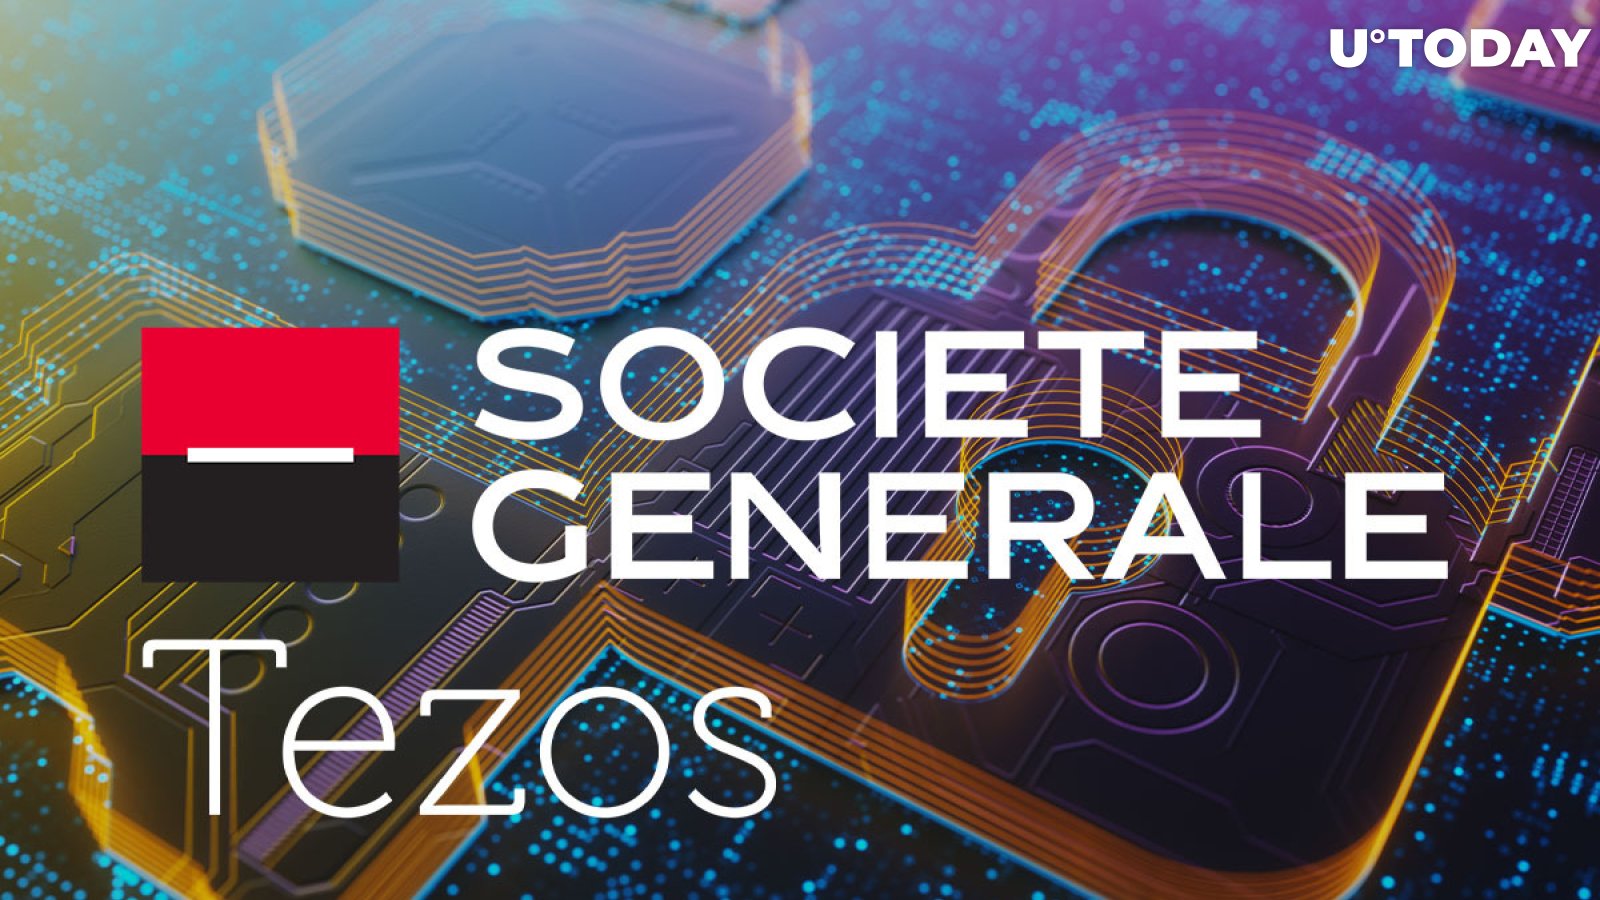 Societe Generale Banking Giant Issues Security Token on Tezos (XTZ): Details